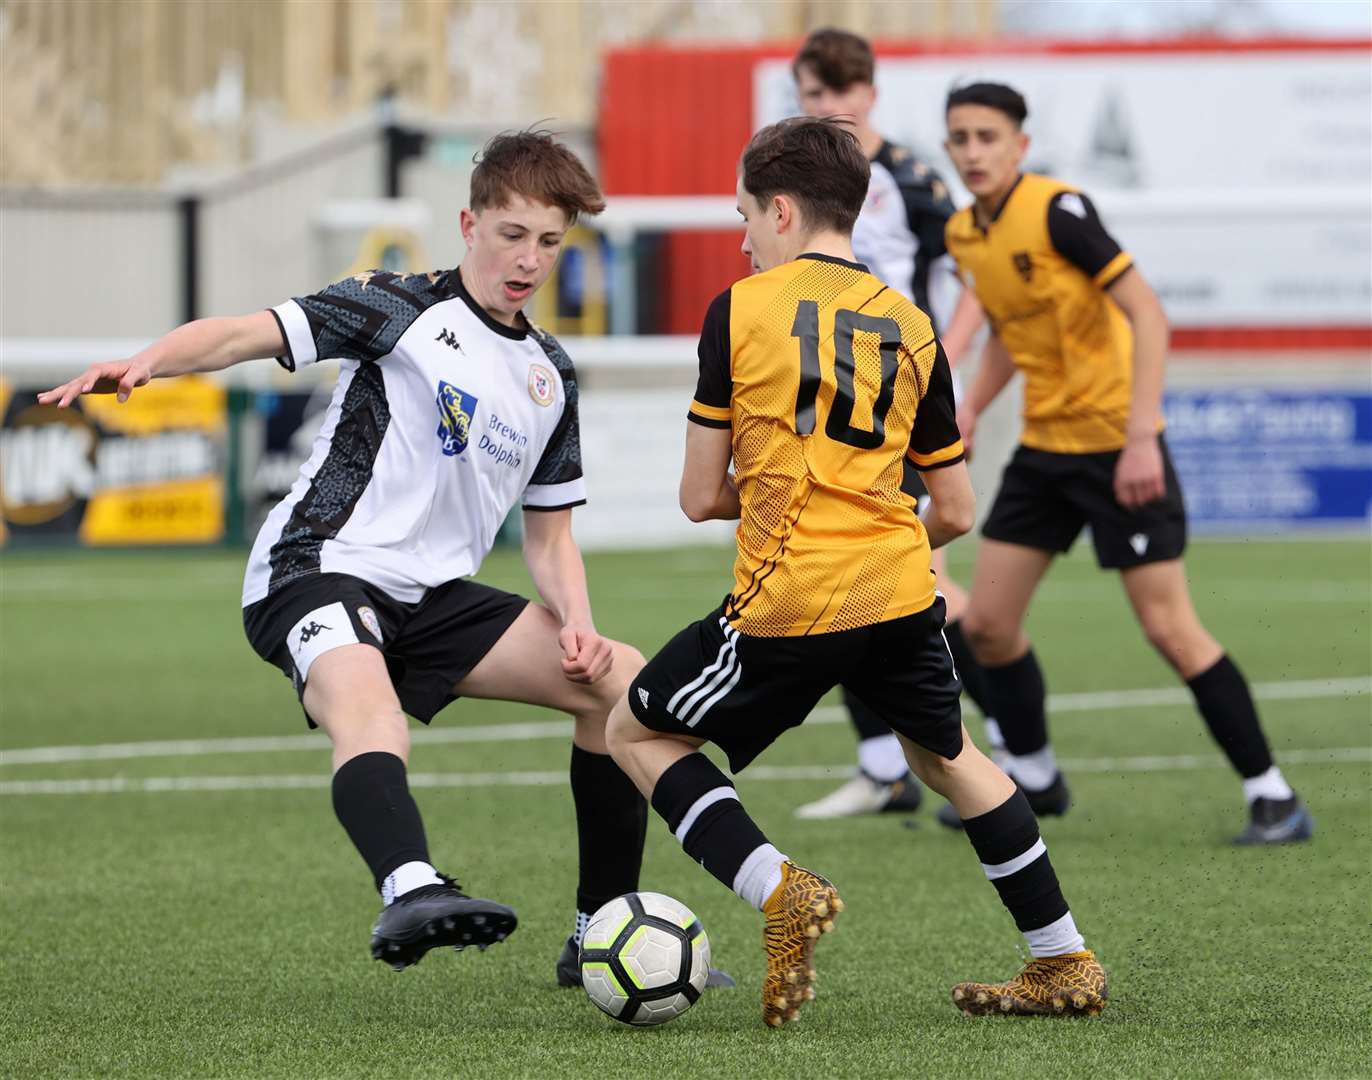 Maidstone under-14s' Sammy Railton on the ball against Bromley at Holm Park. Picture: PSP Images